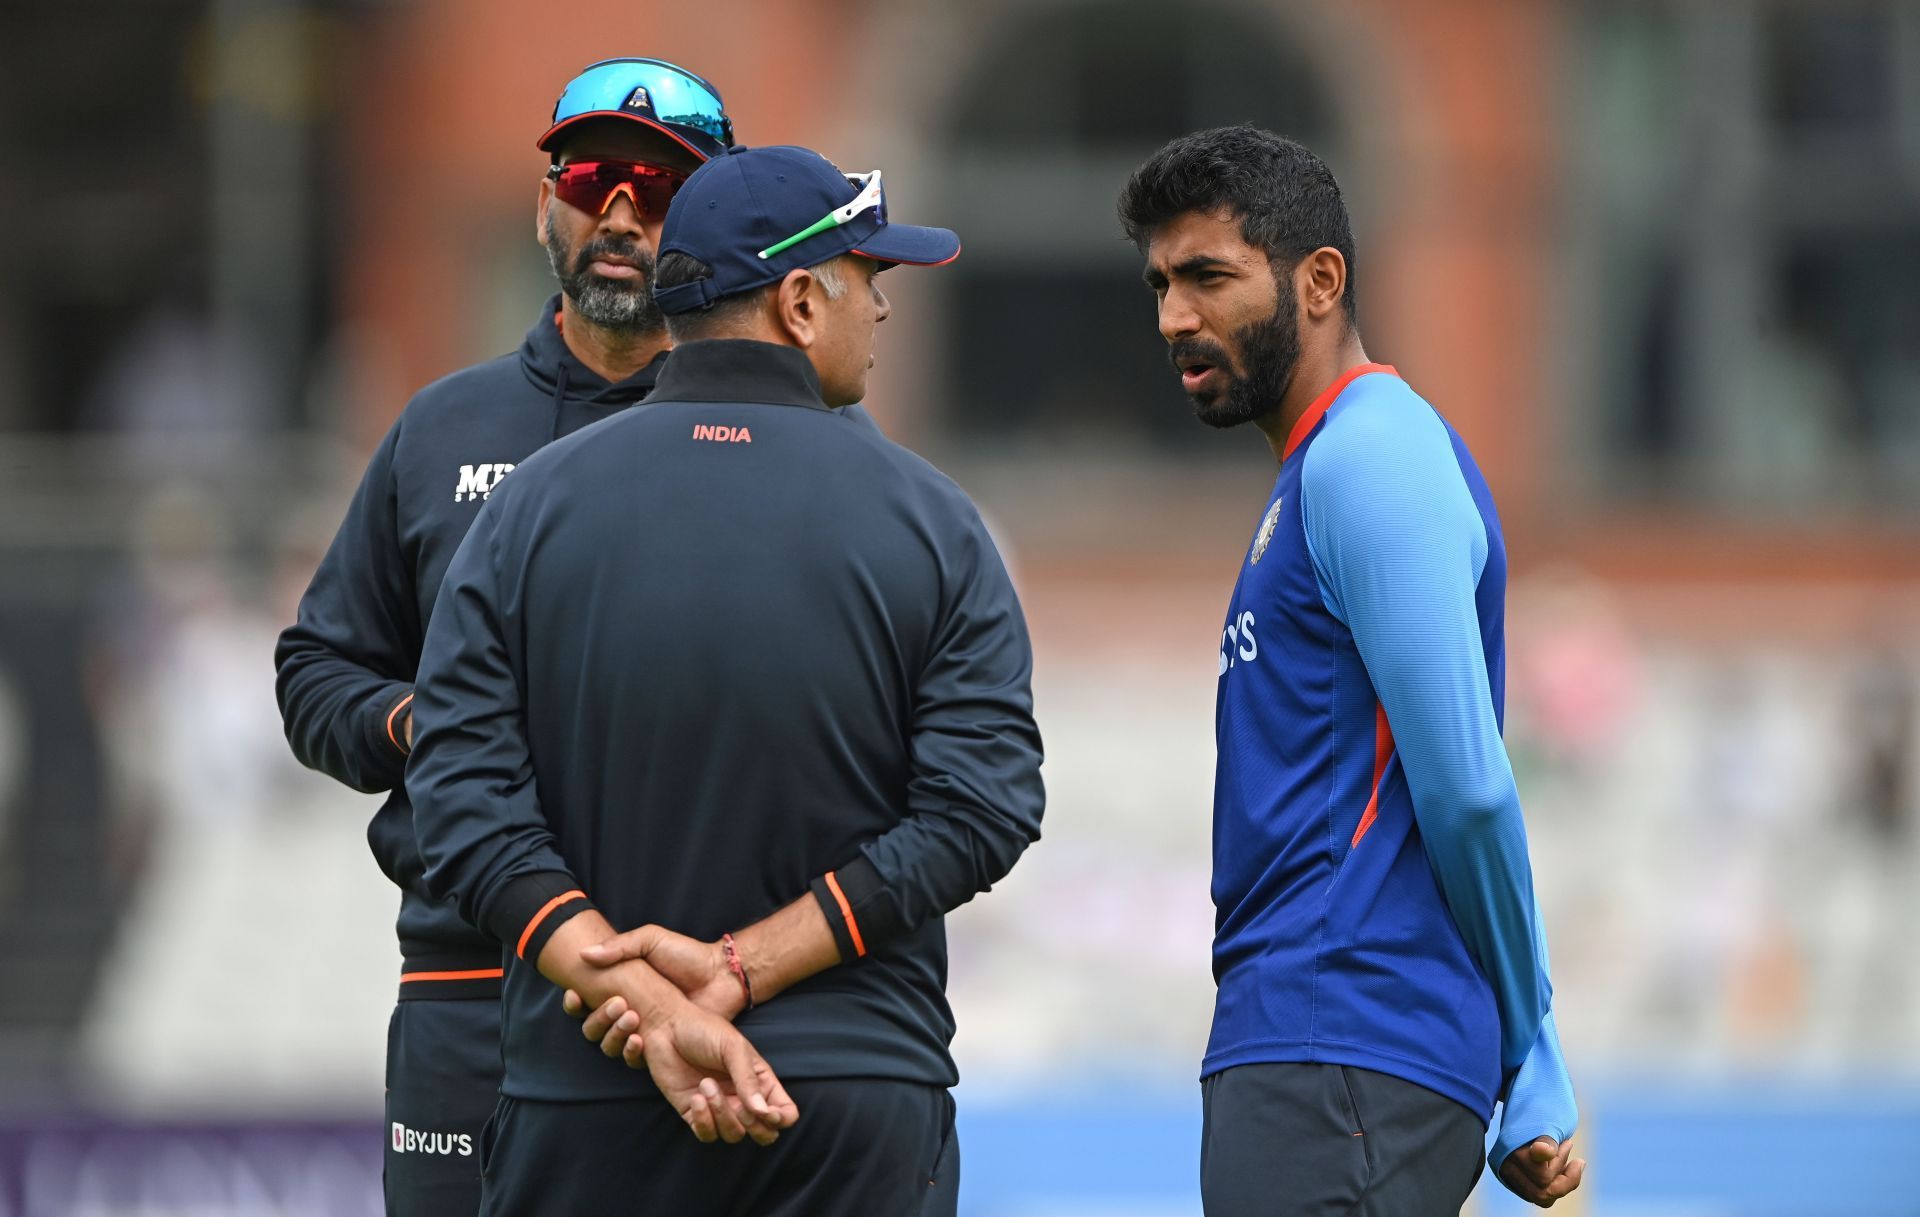 Jasprit Bumrah will be keenly watched on his comeback